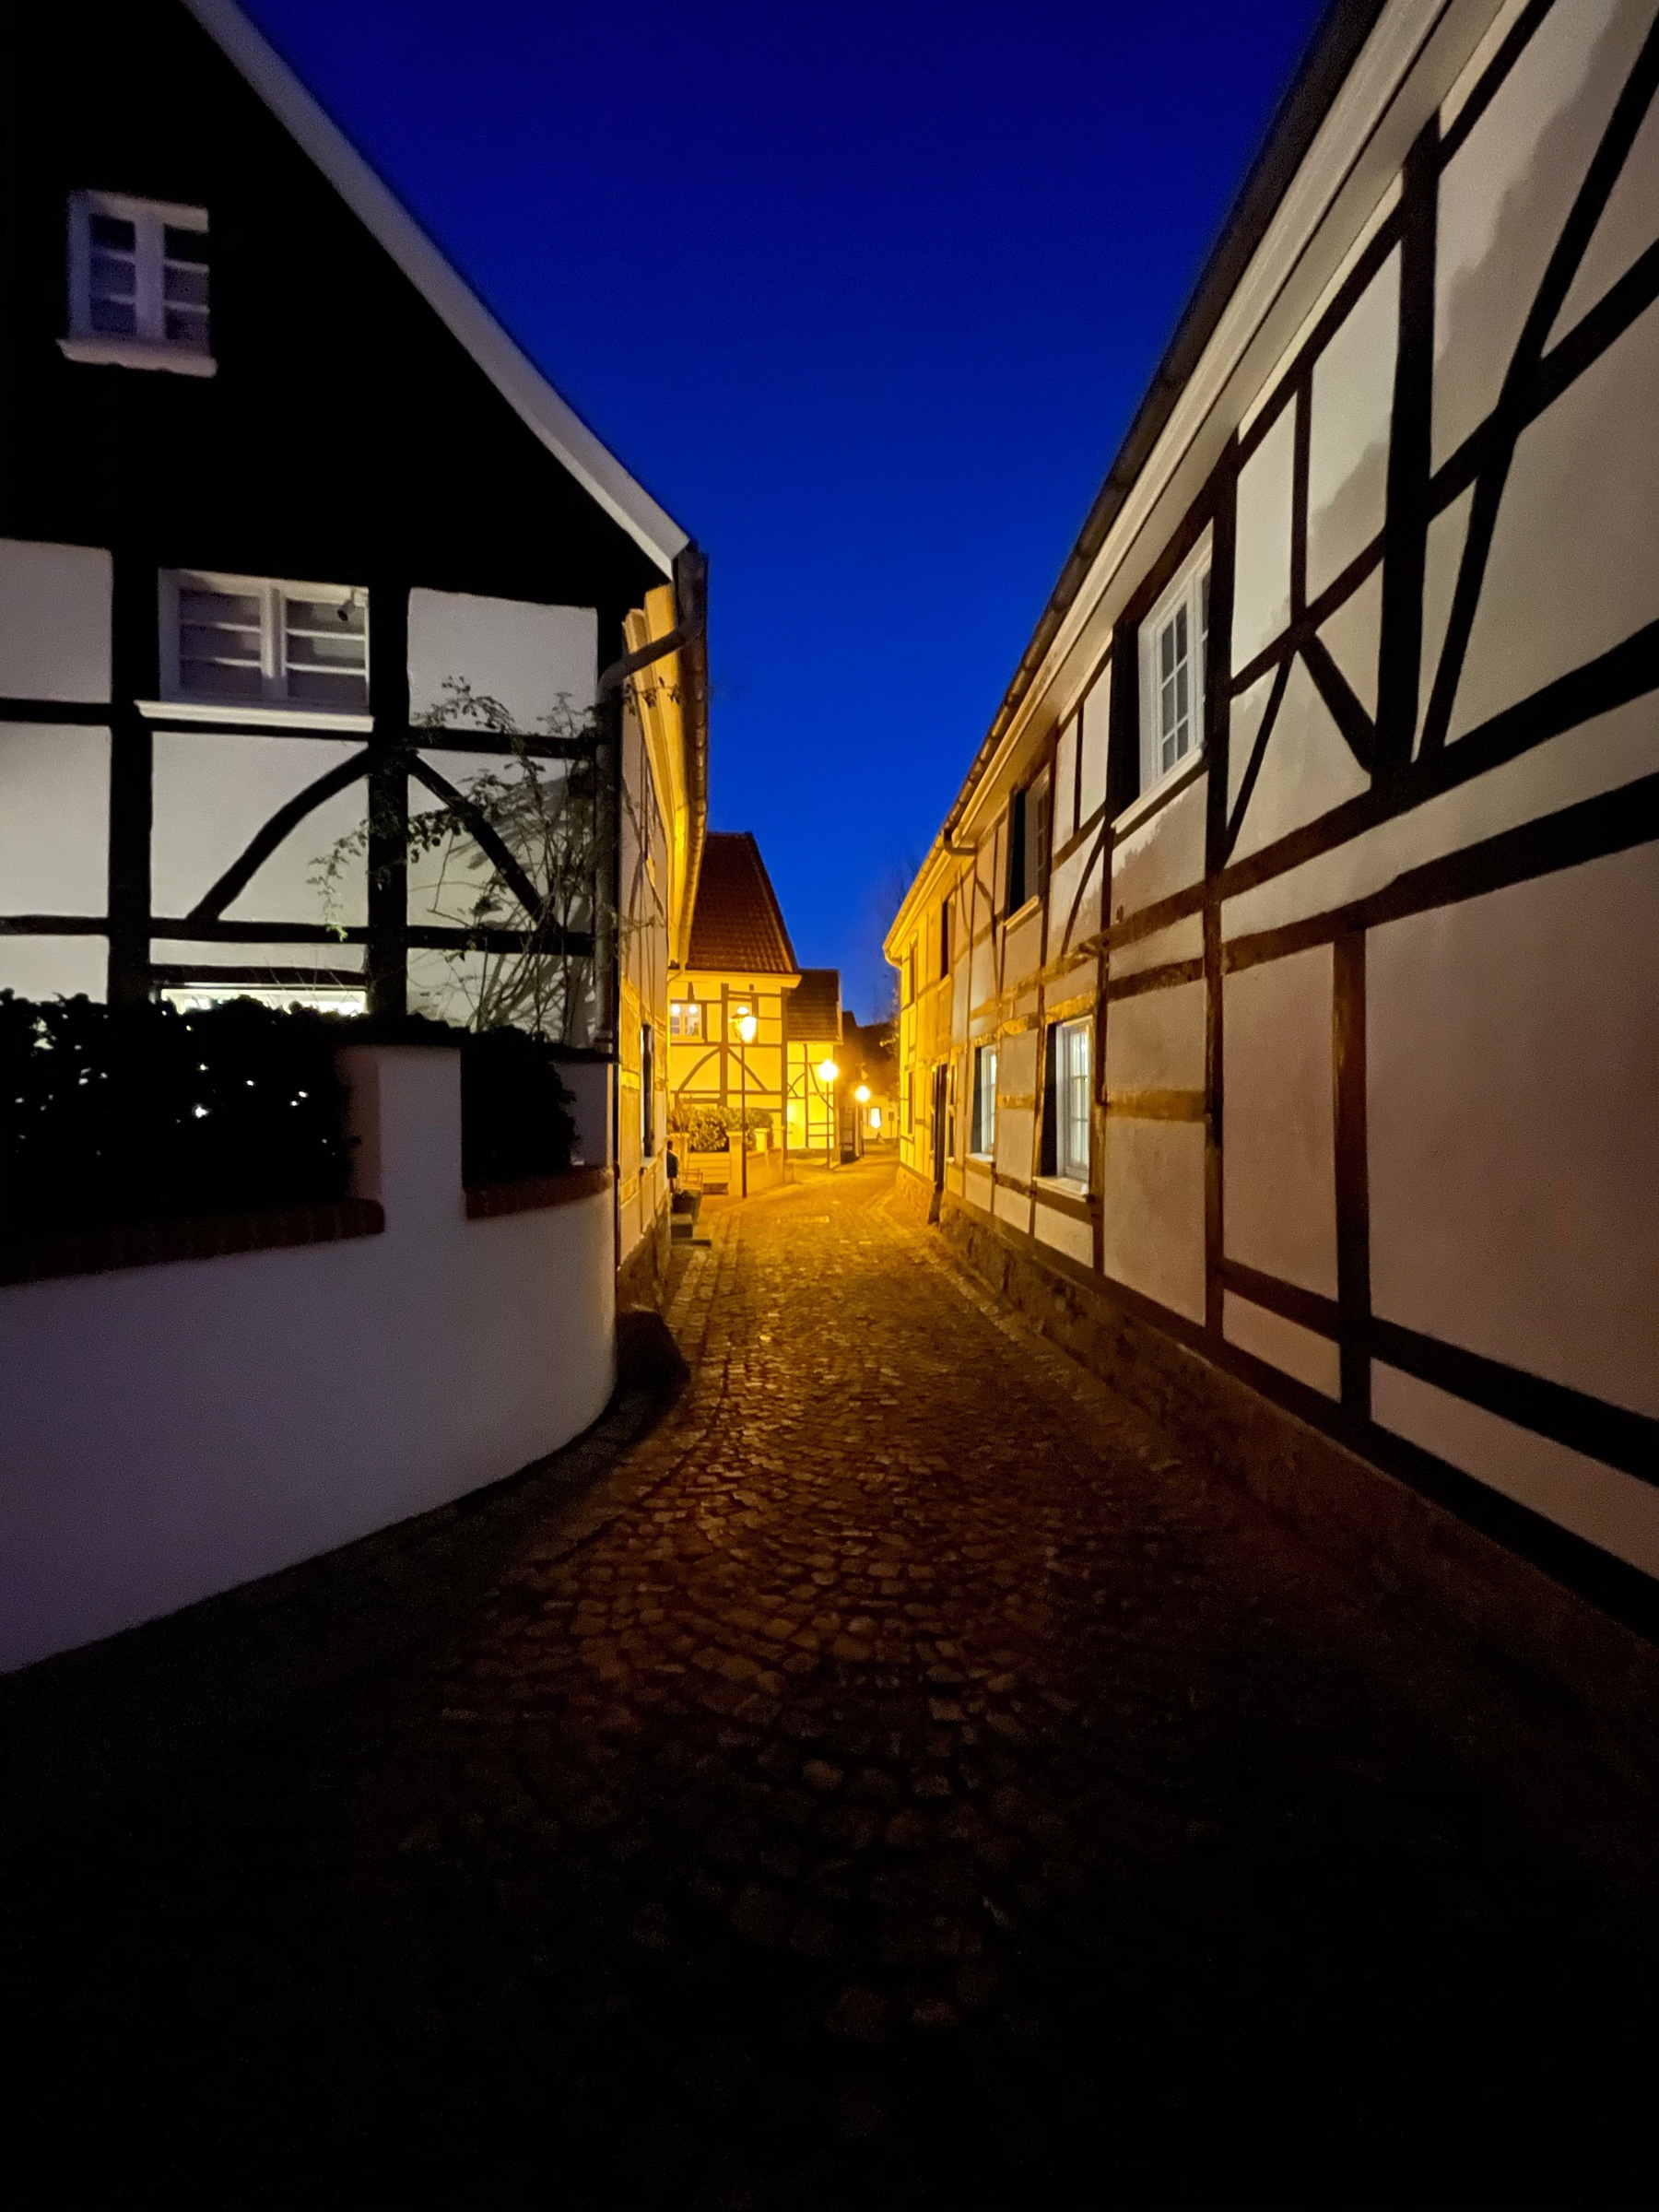 Narrow cobblestone street with framework houses on either side, shot at night with a dark blue sky and yellow lights in the distance. 